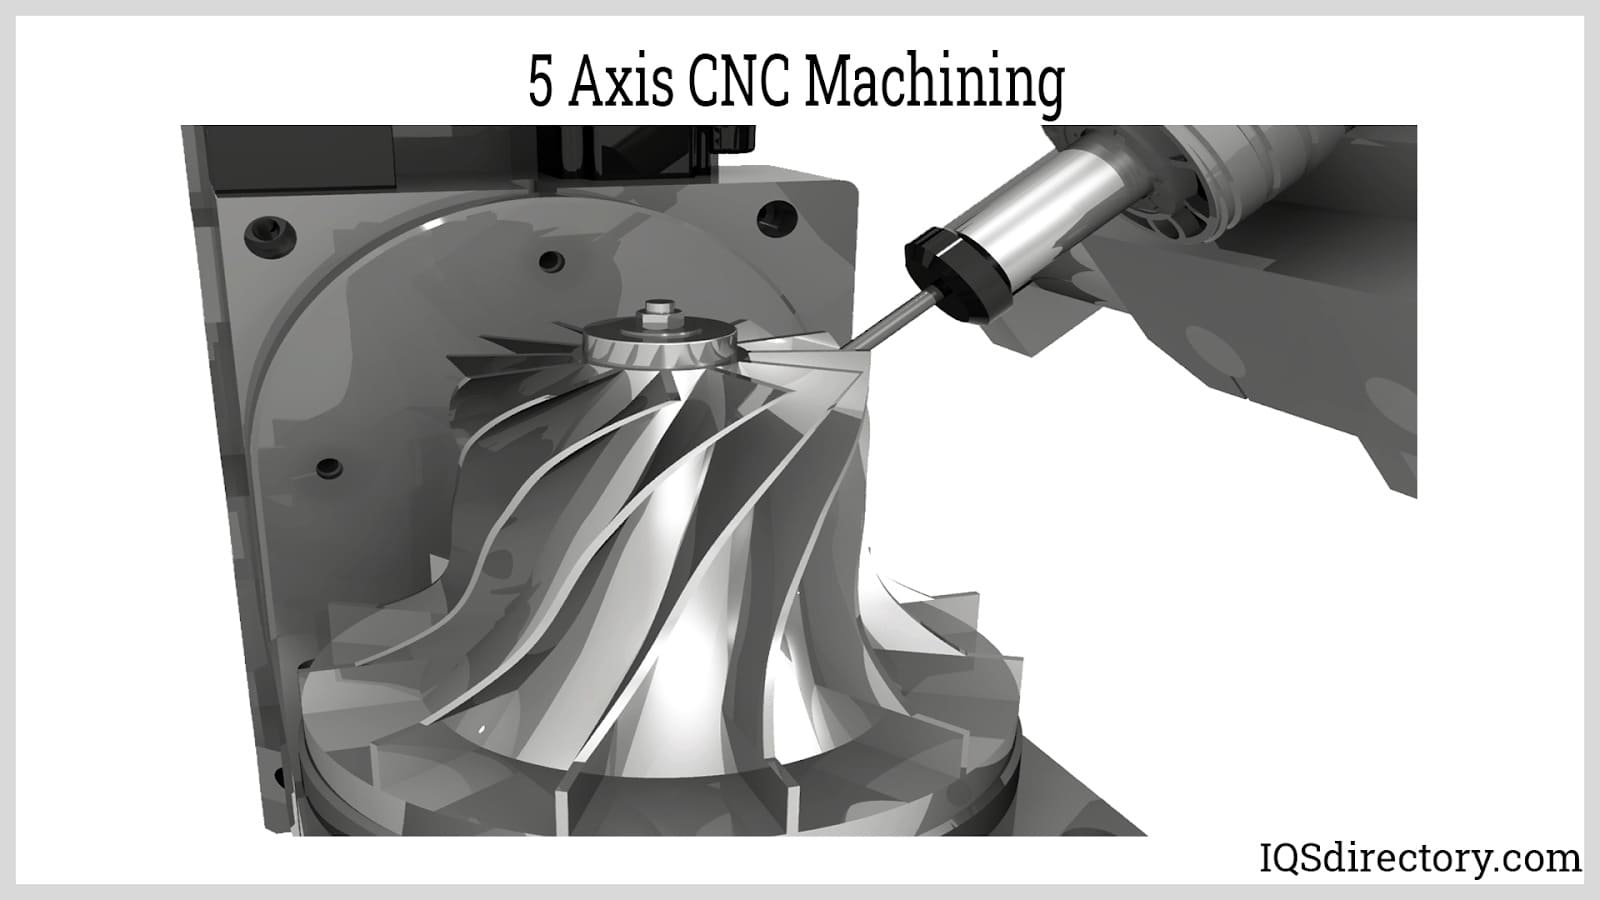 What Is a CNC Spindle & How Does It Function? - Superior Spindle